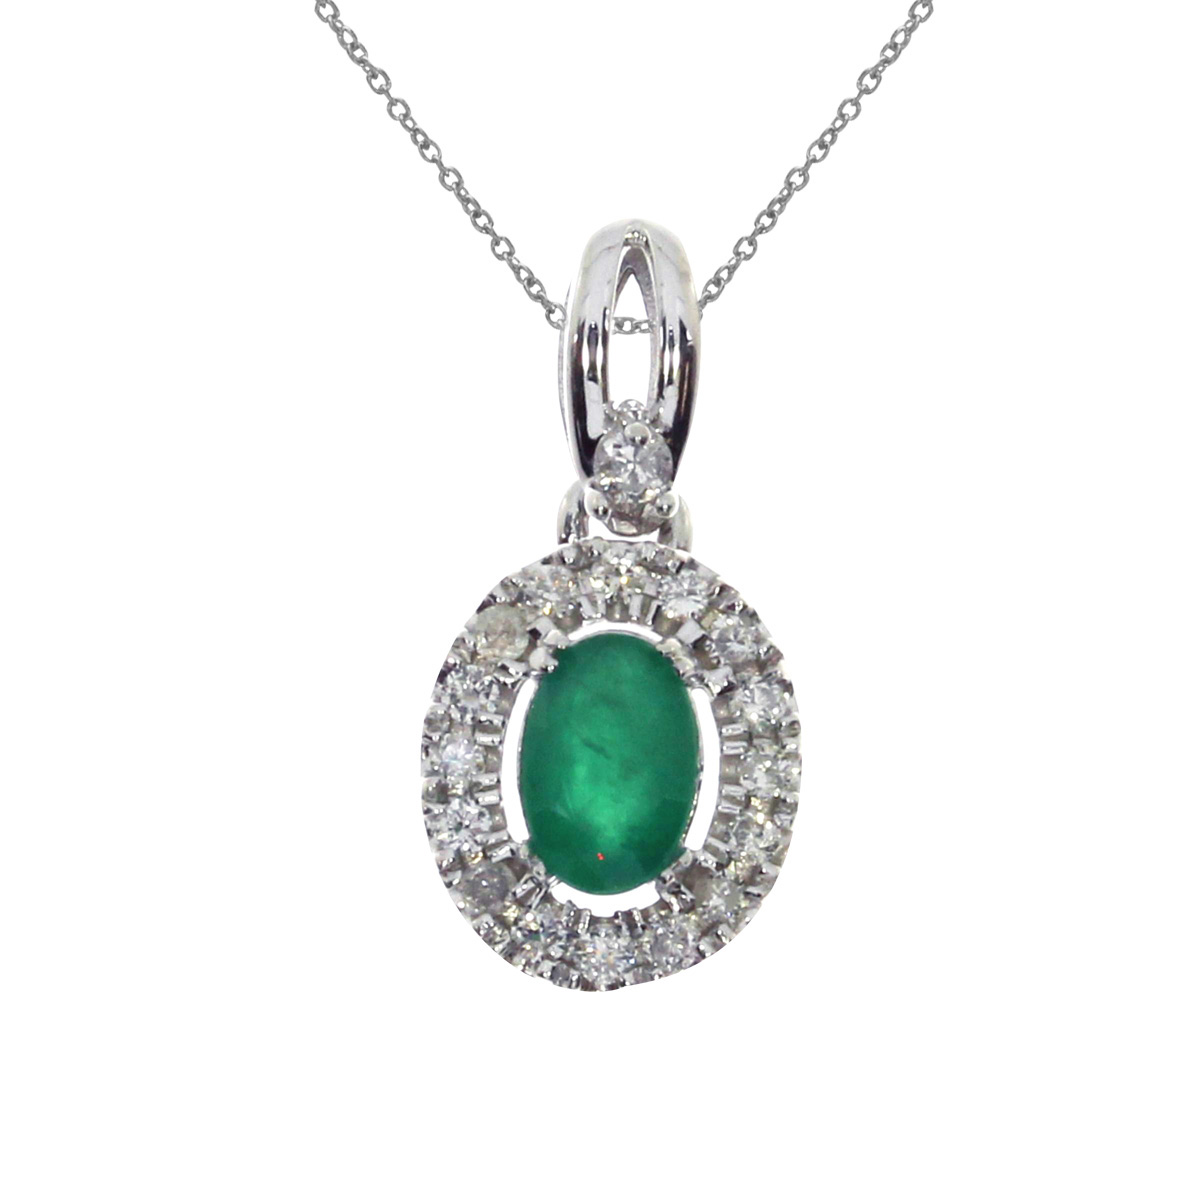 JCX2627: The genuine 6x4 mm oval emerald gives this pendant a dash of color  while the halo of natural diamonds creates shimmering radiance.